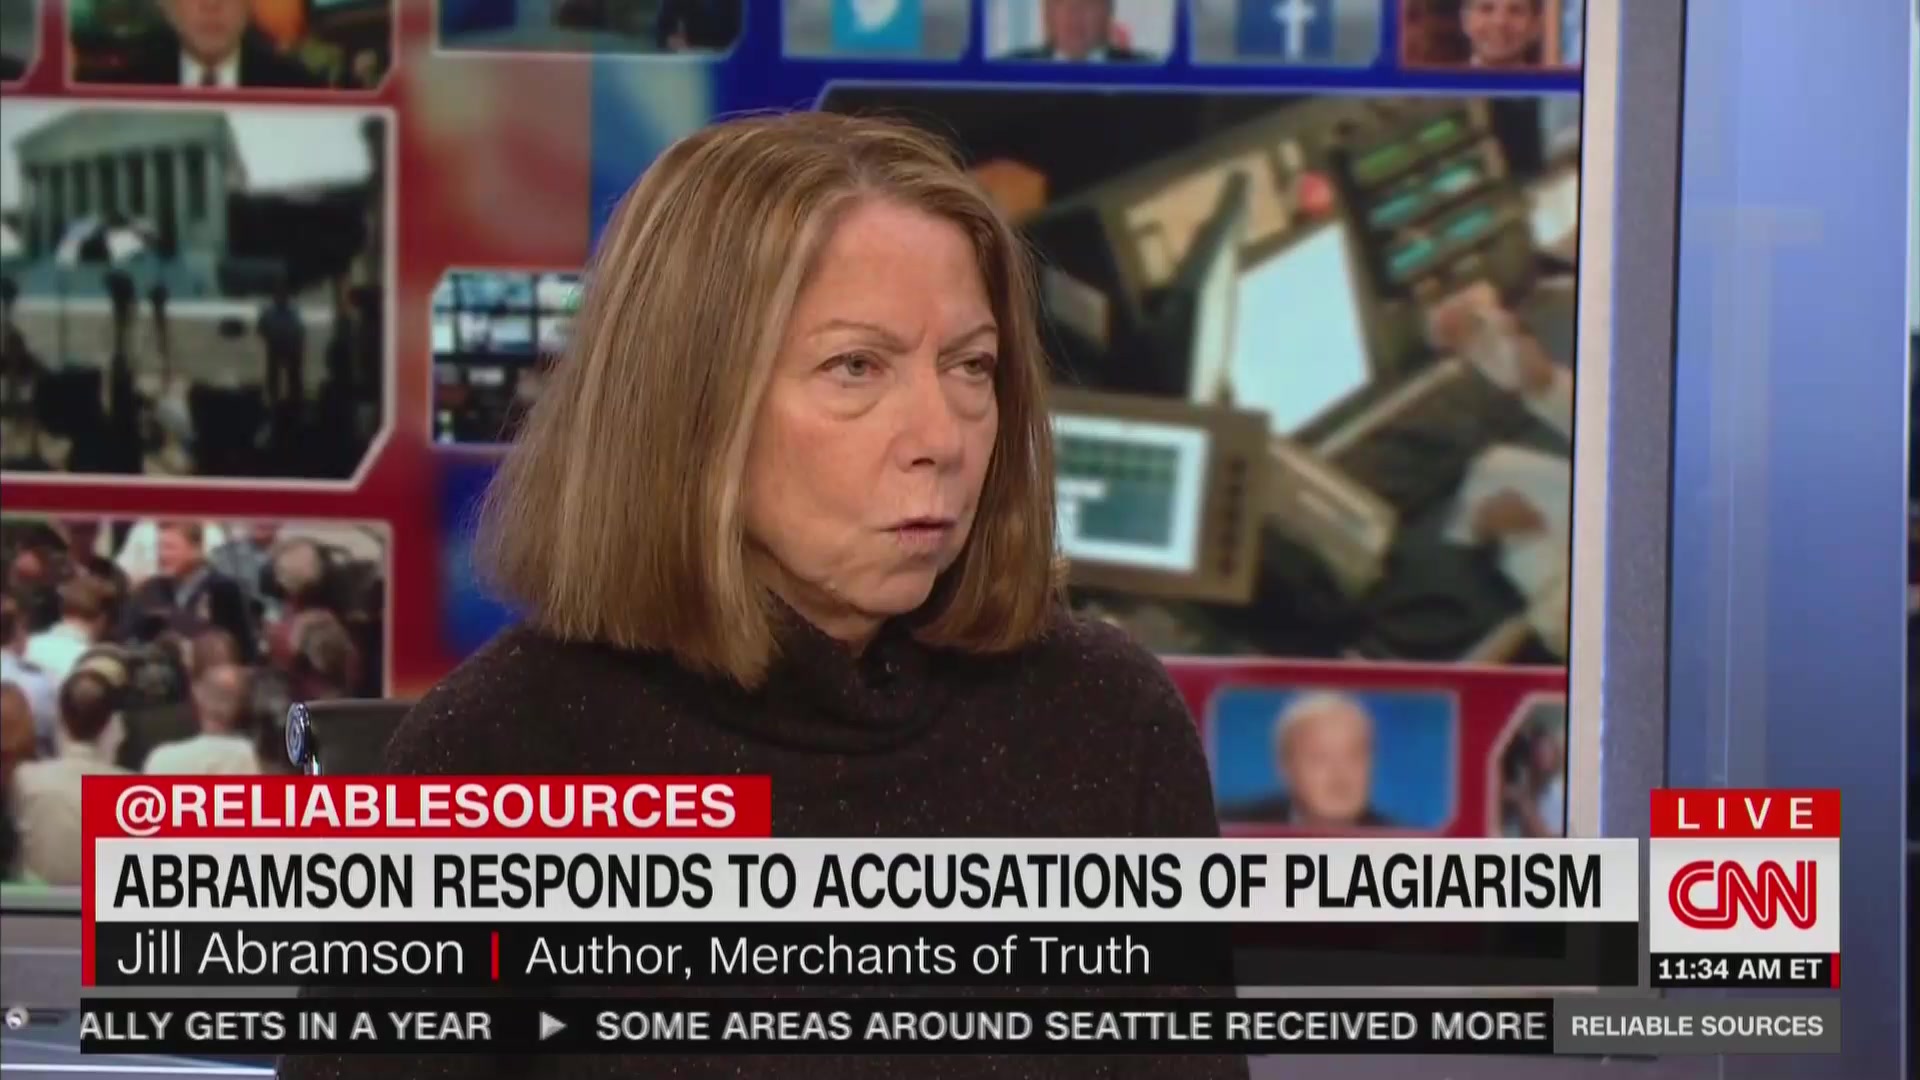 Jill Abramson Won’t Own Up To Plagiarism, Blames Controversy On Vice ‘Oppo Campaign’